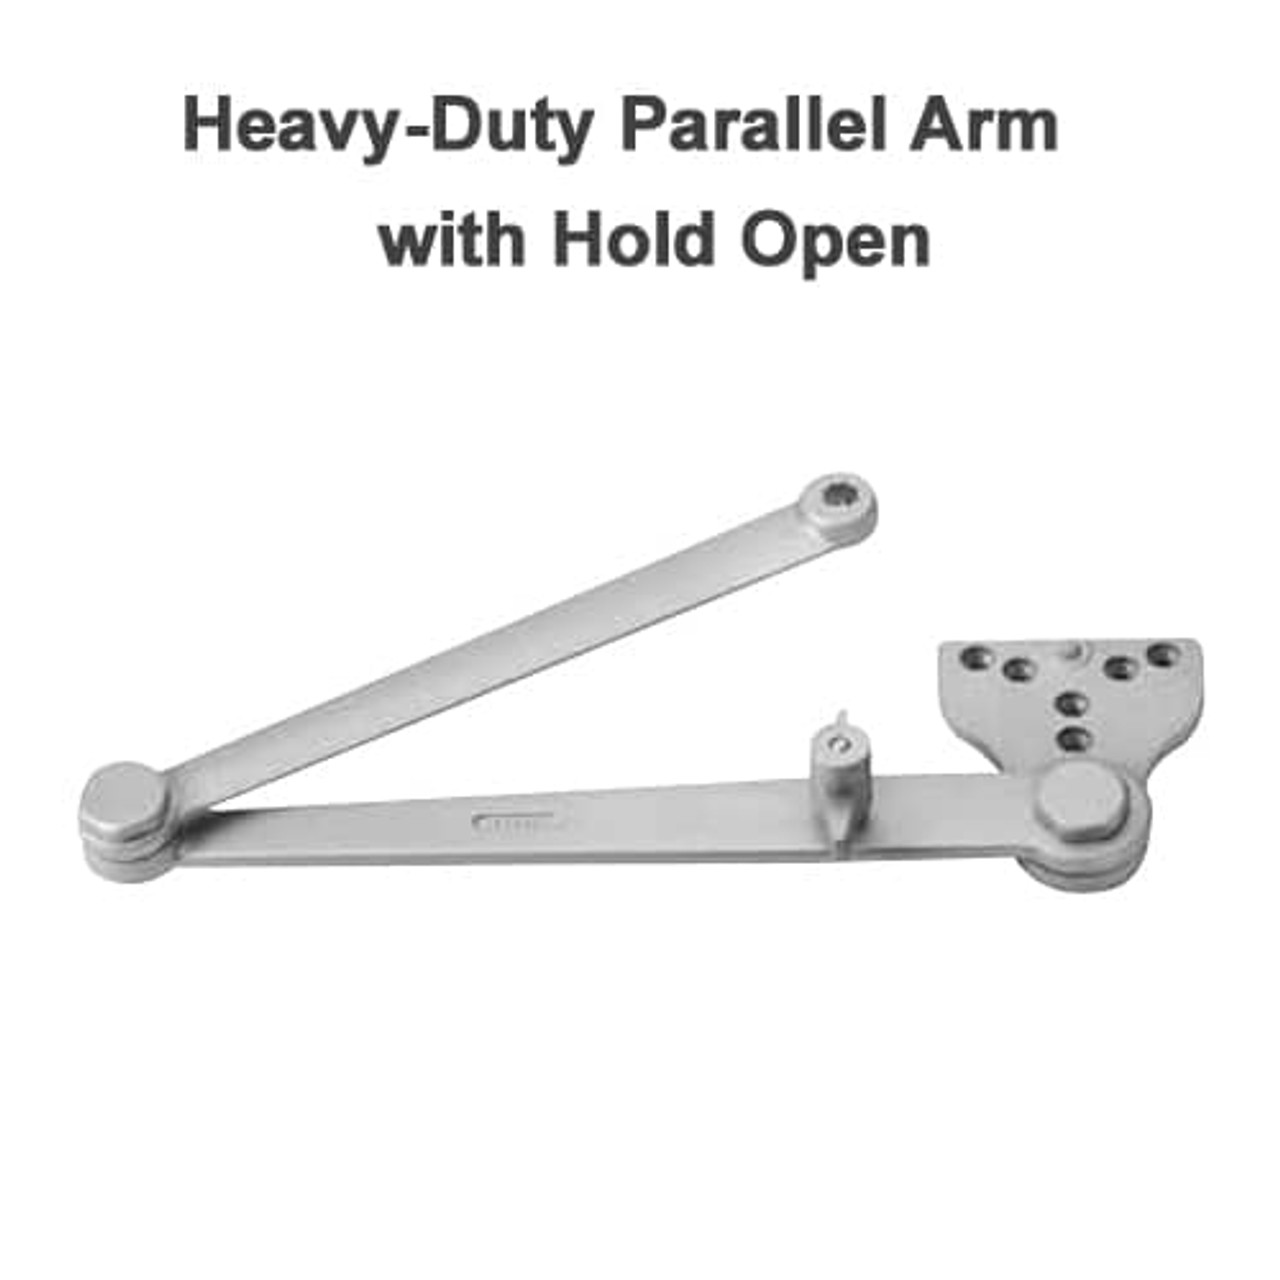 DC6210-A2-689-M54 Corbin 6000 Series Multi-Sized Heavy-Duty Parallel Arm Door Closers with Hold Open Arm in Silver Aluminum